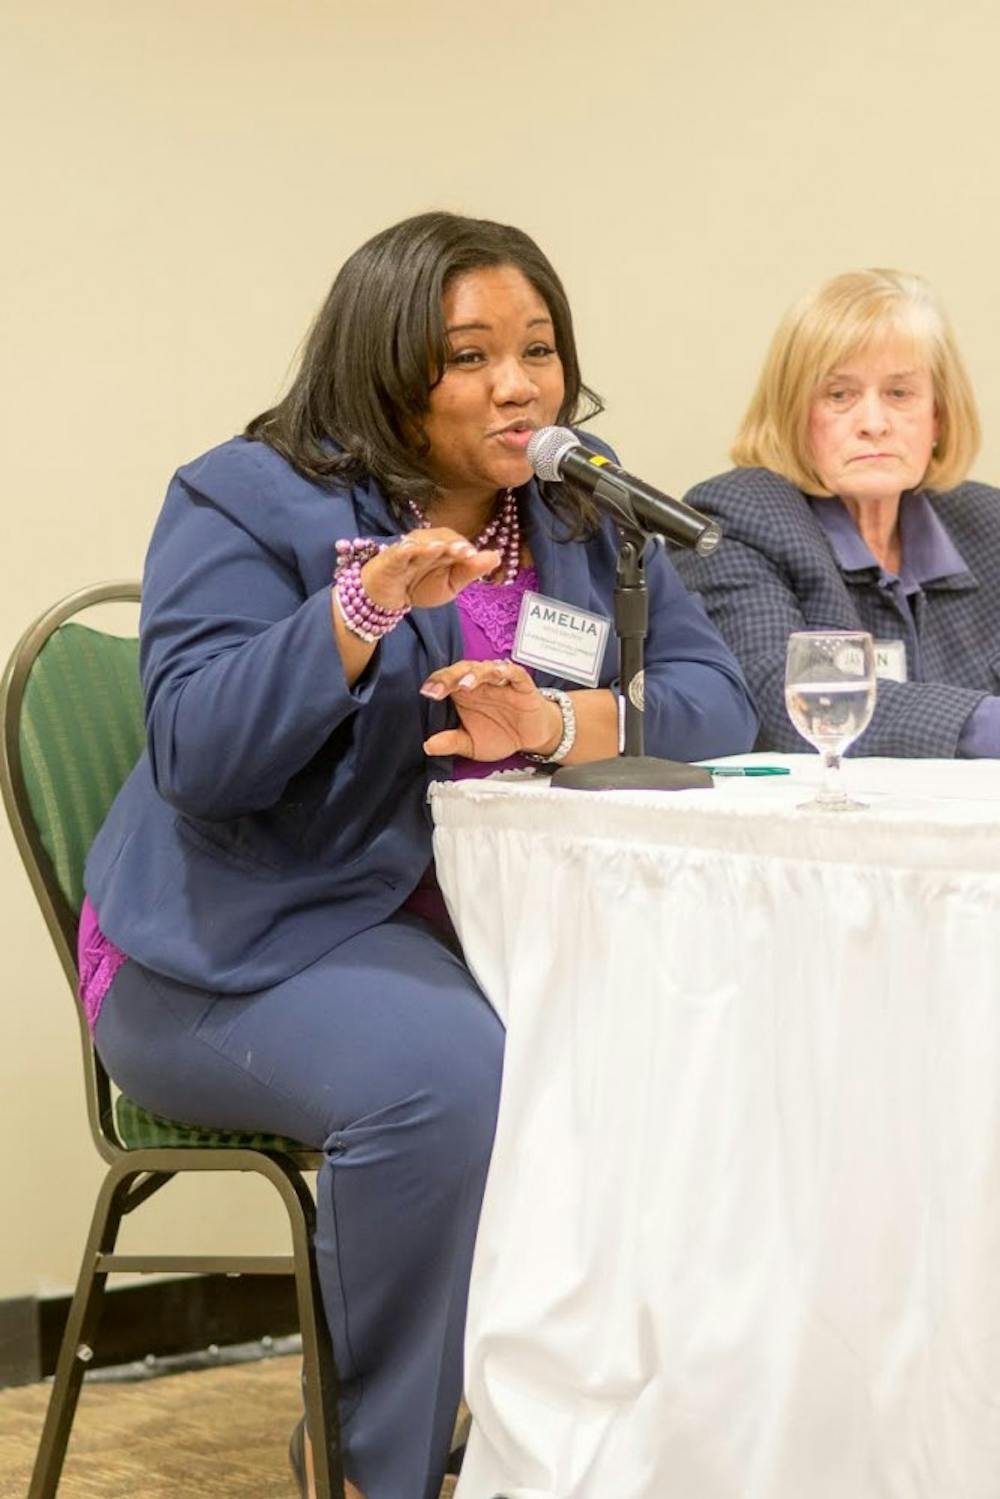 Panel discusses the role of local female leaders